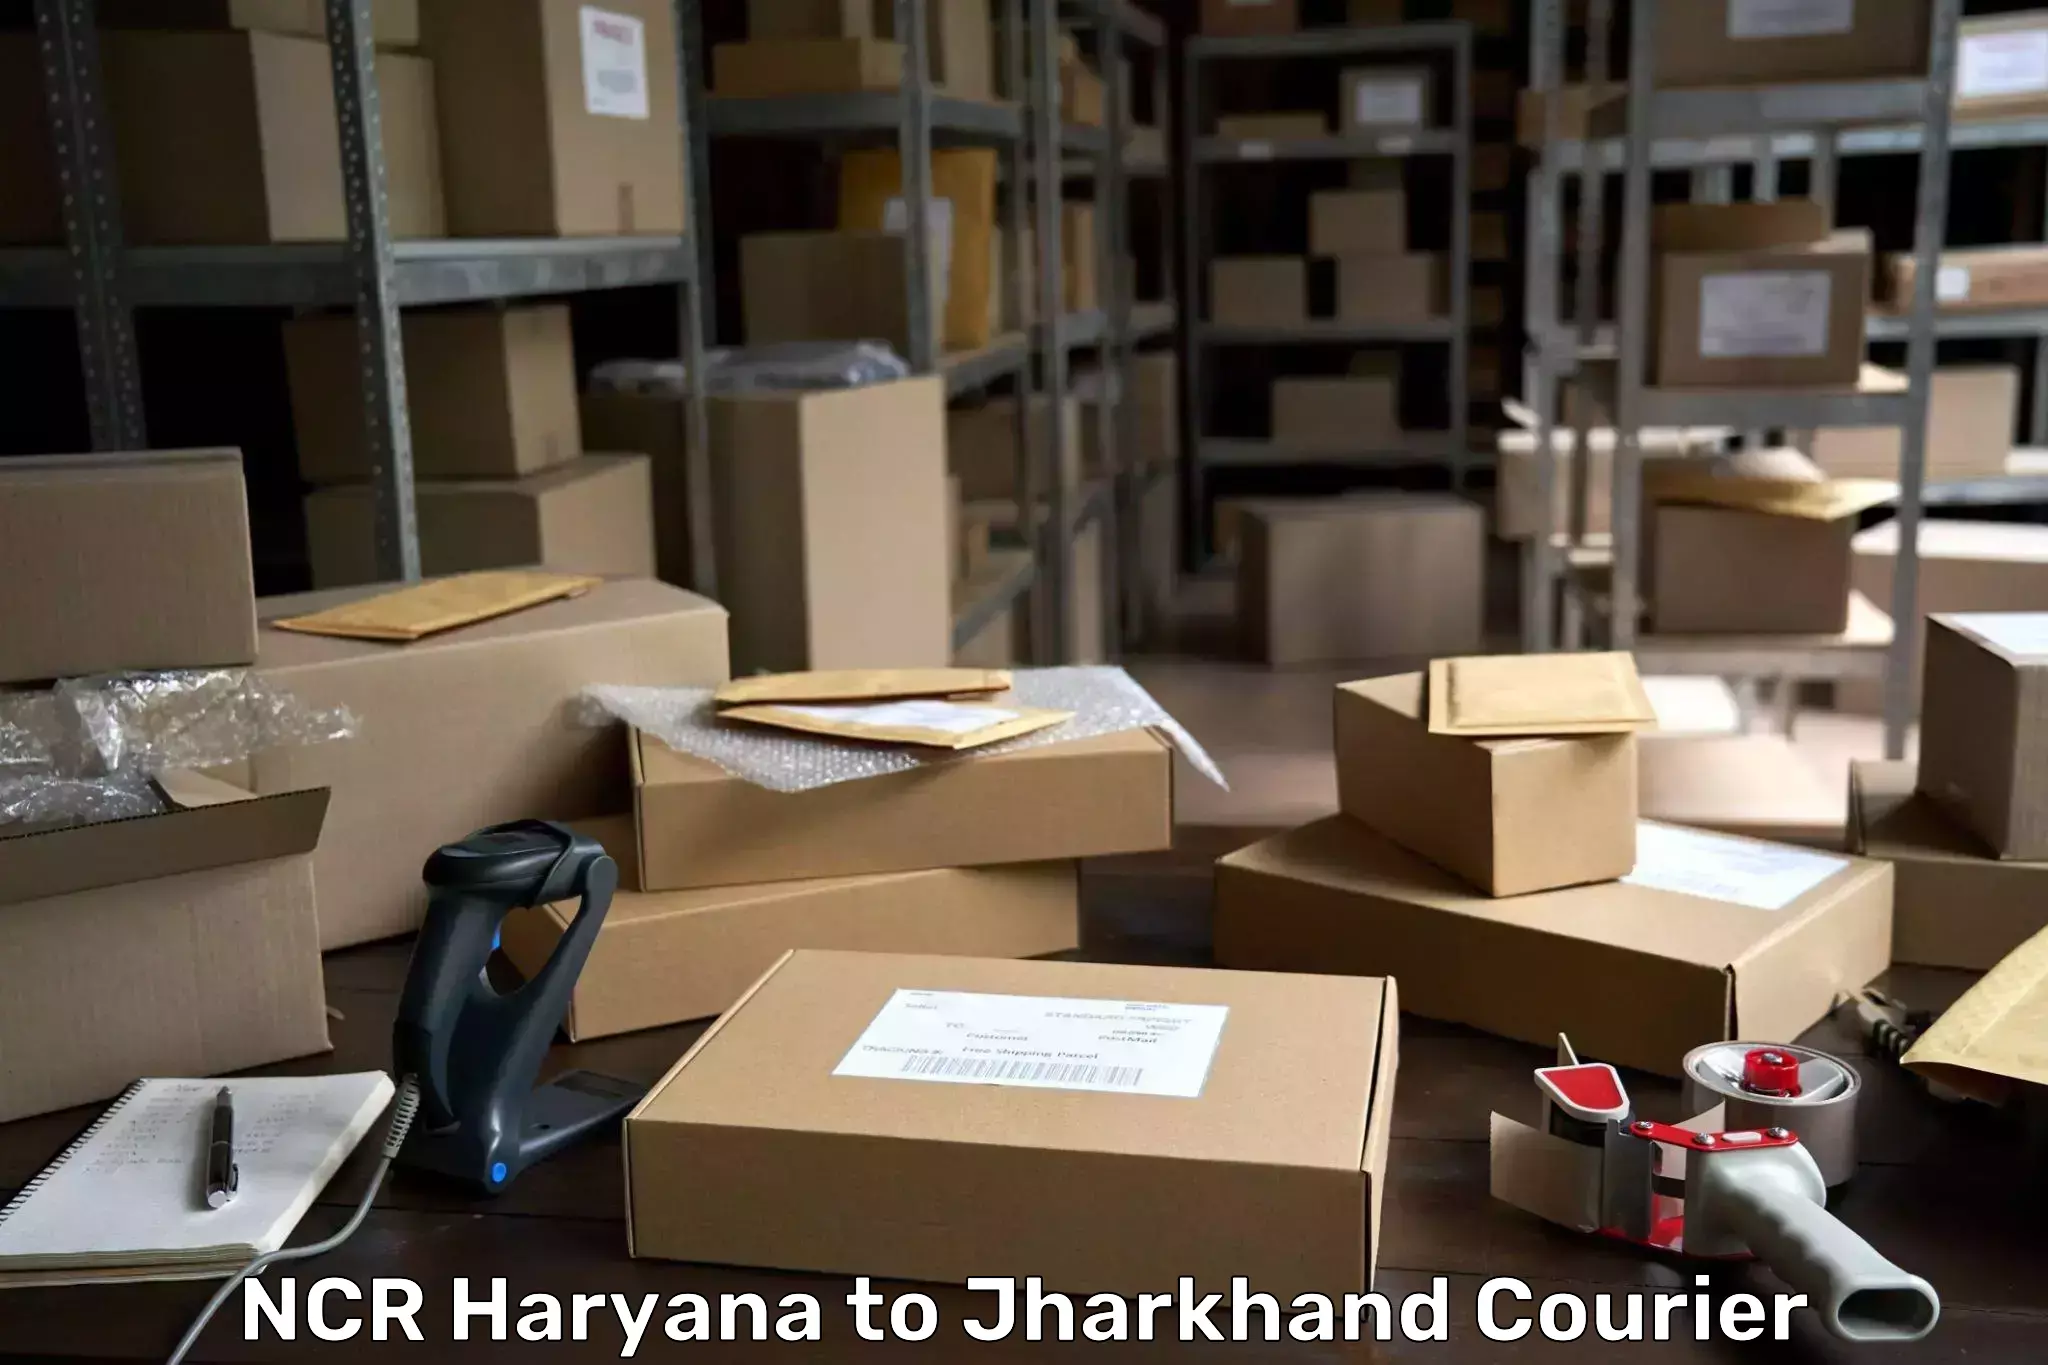 Express logistics in NCR Haryana to Jharkhand